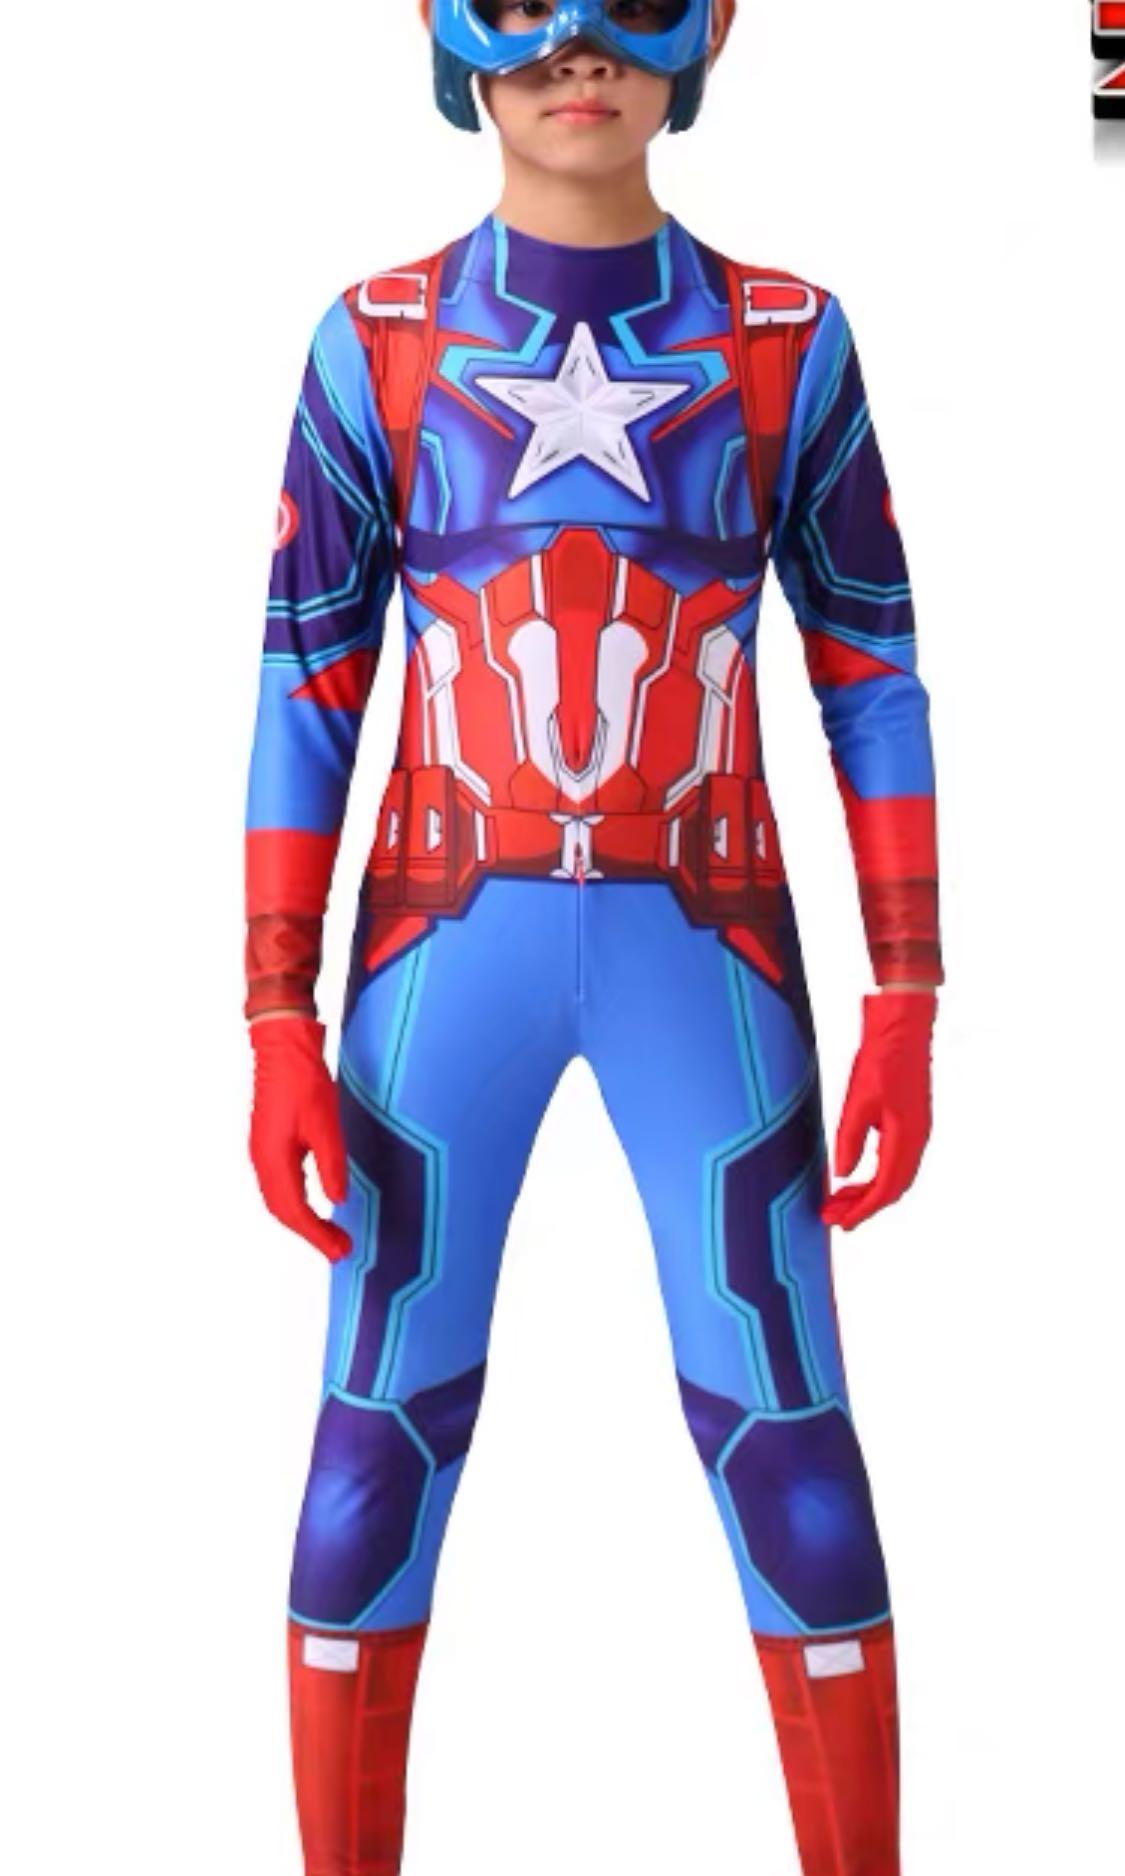 Captain America costume NEW NEVER WORN Size Large 10-12 